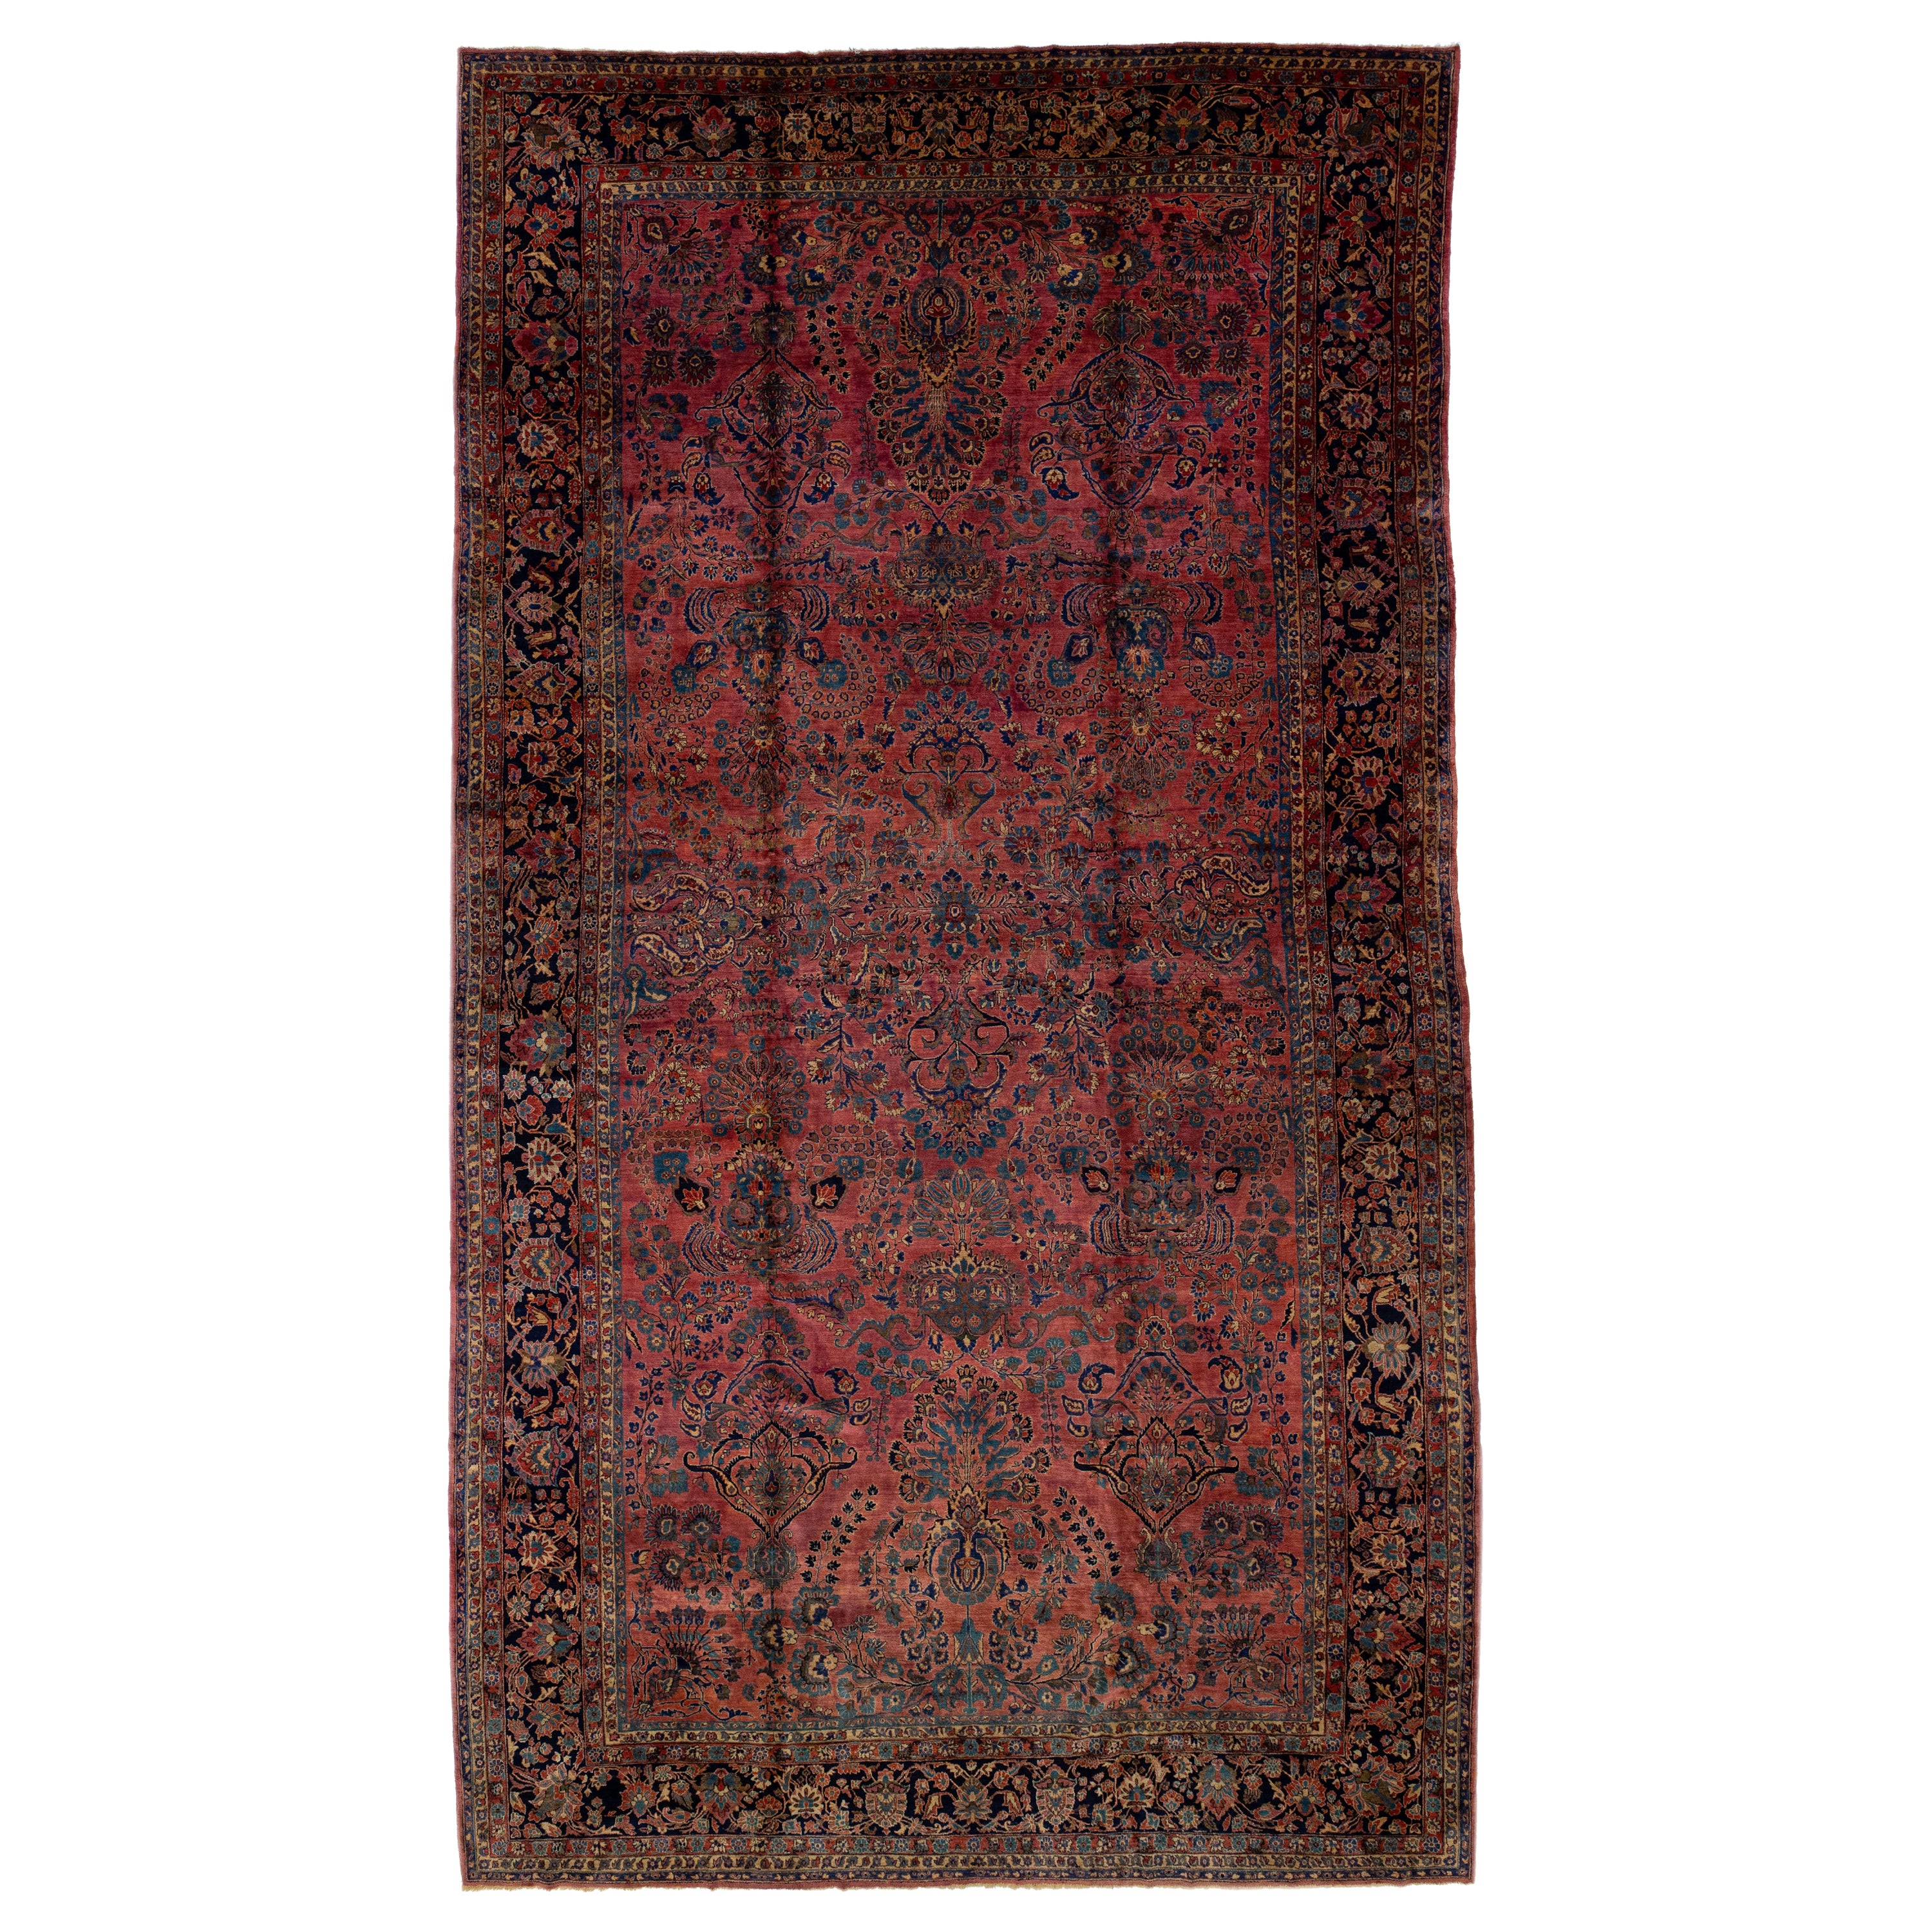 20th Century Persian Sarouk Oversize Wool Rug with Classic Floral Motif